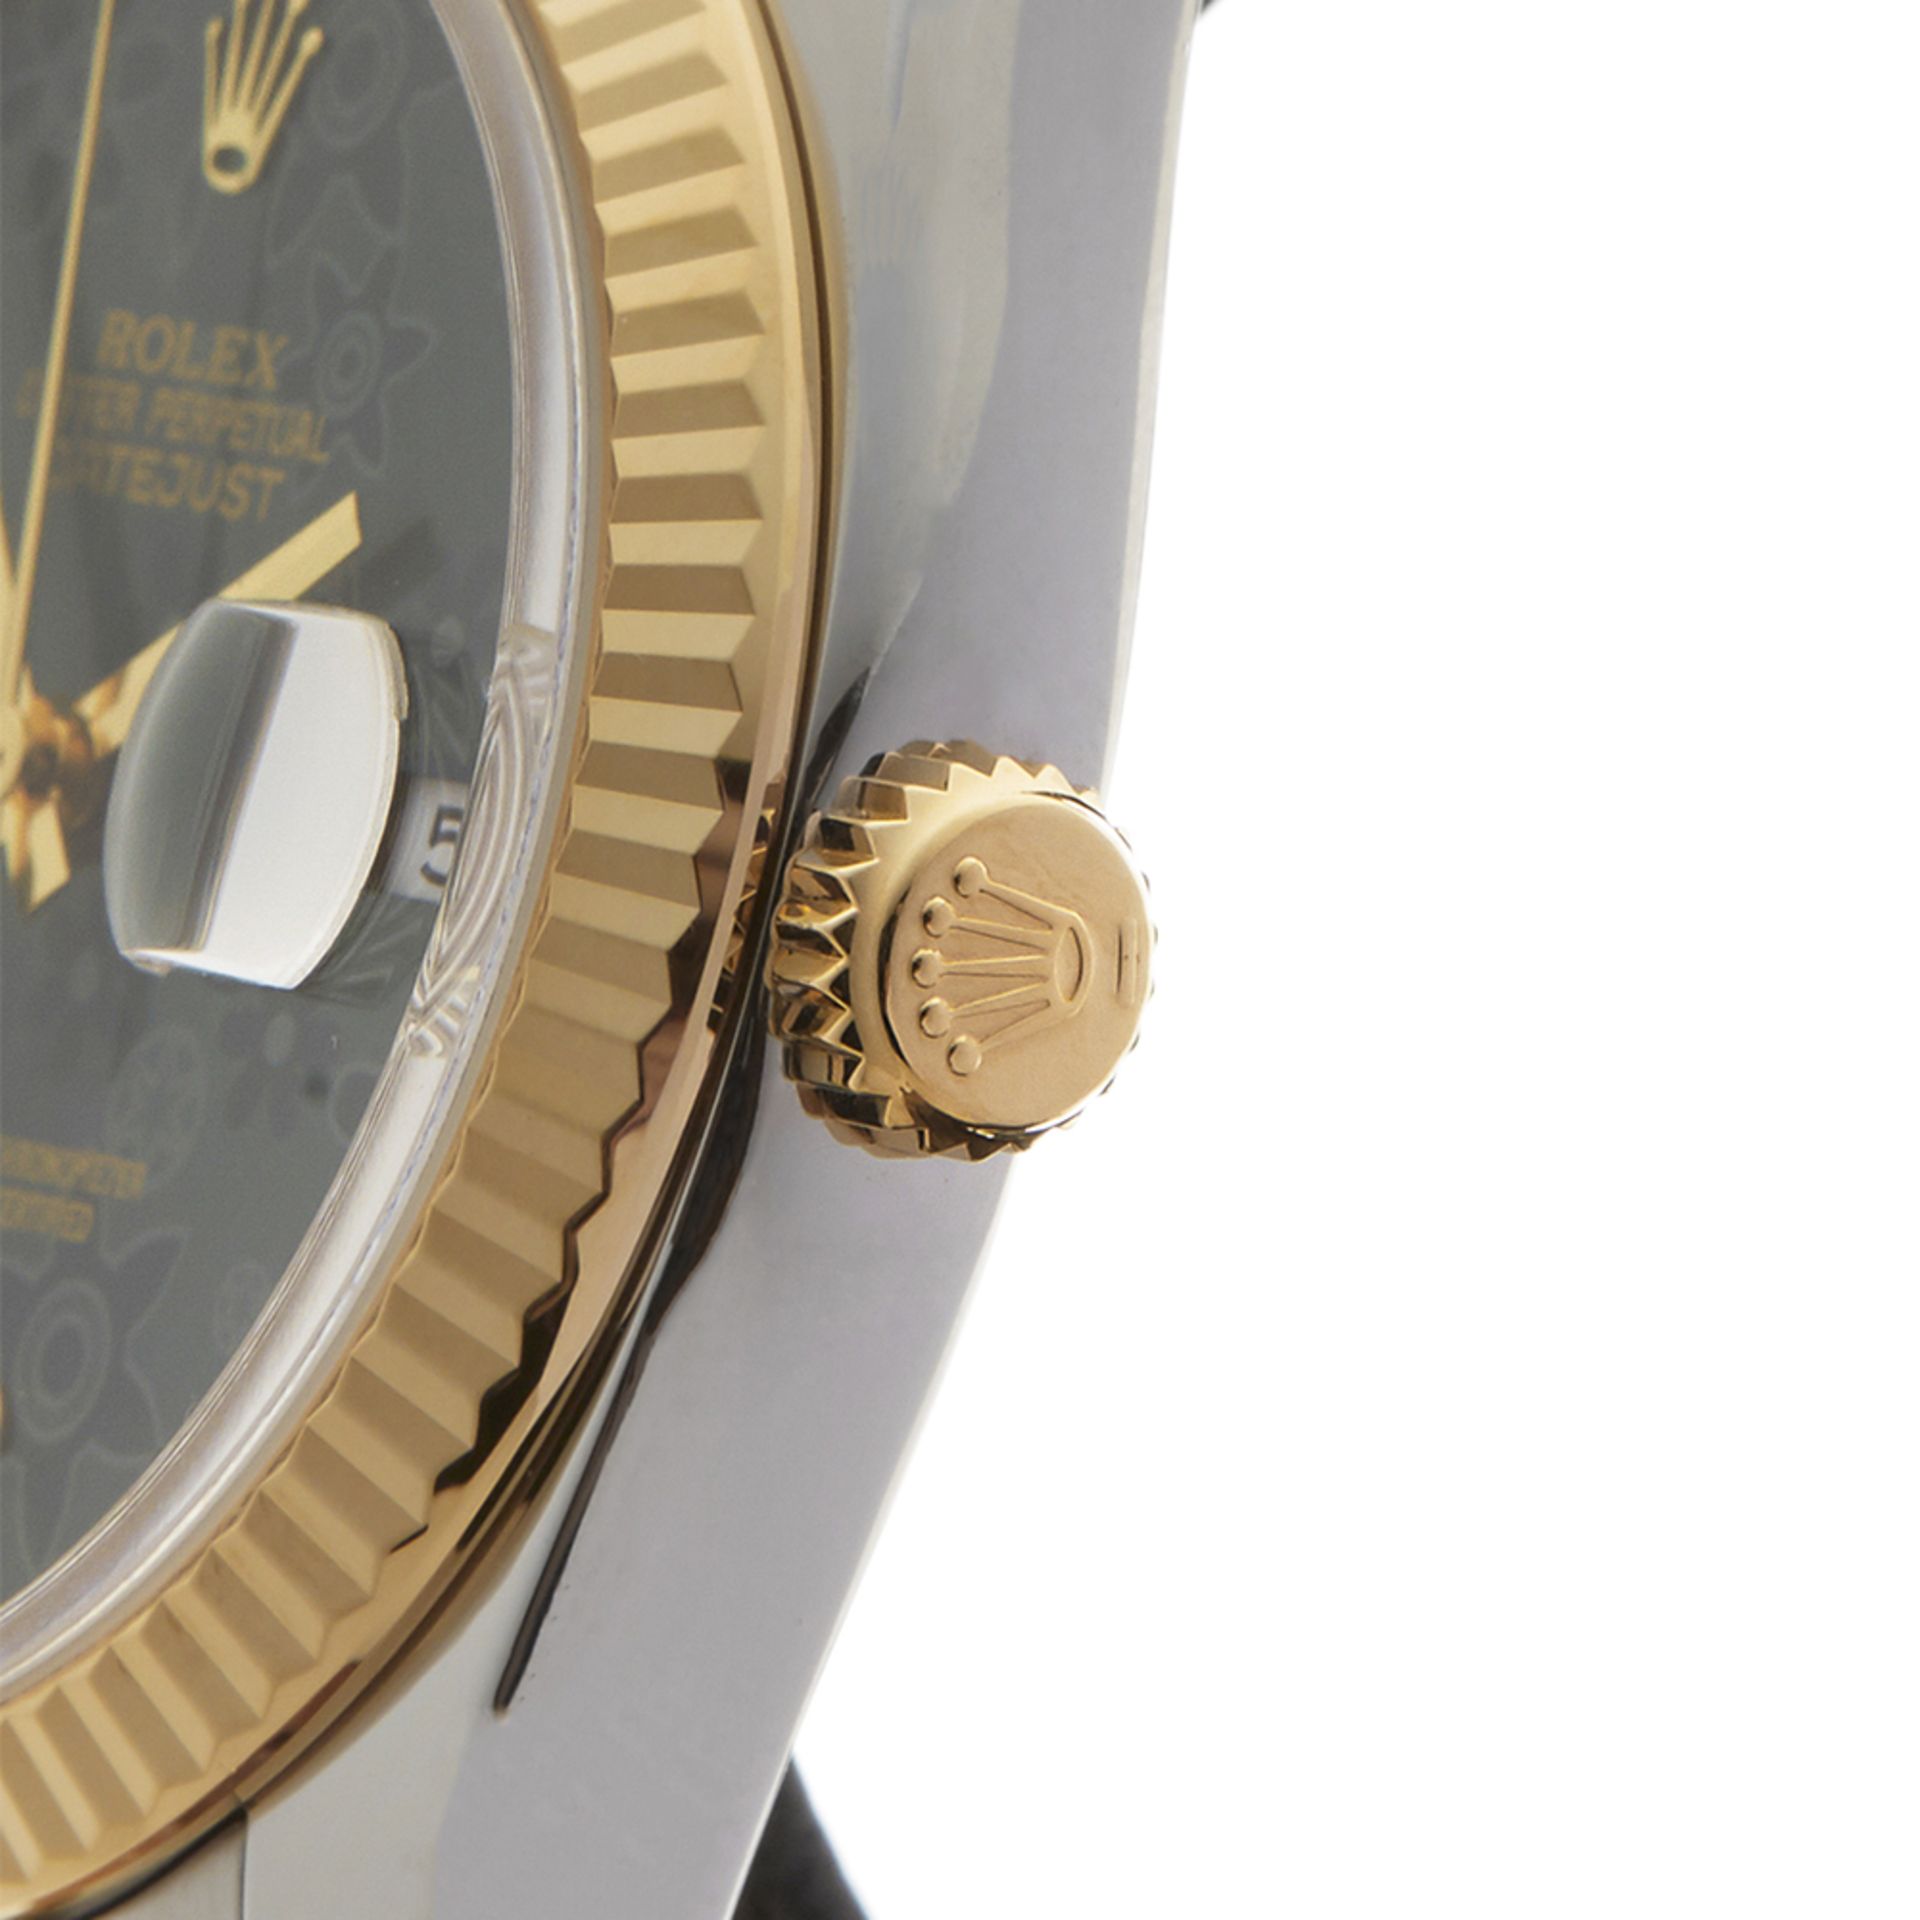 Datejust 36mm Stainless Steel & 18K Yellow Gold - 116233 - Image 4 of 9